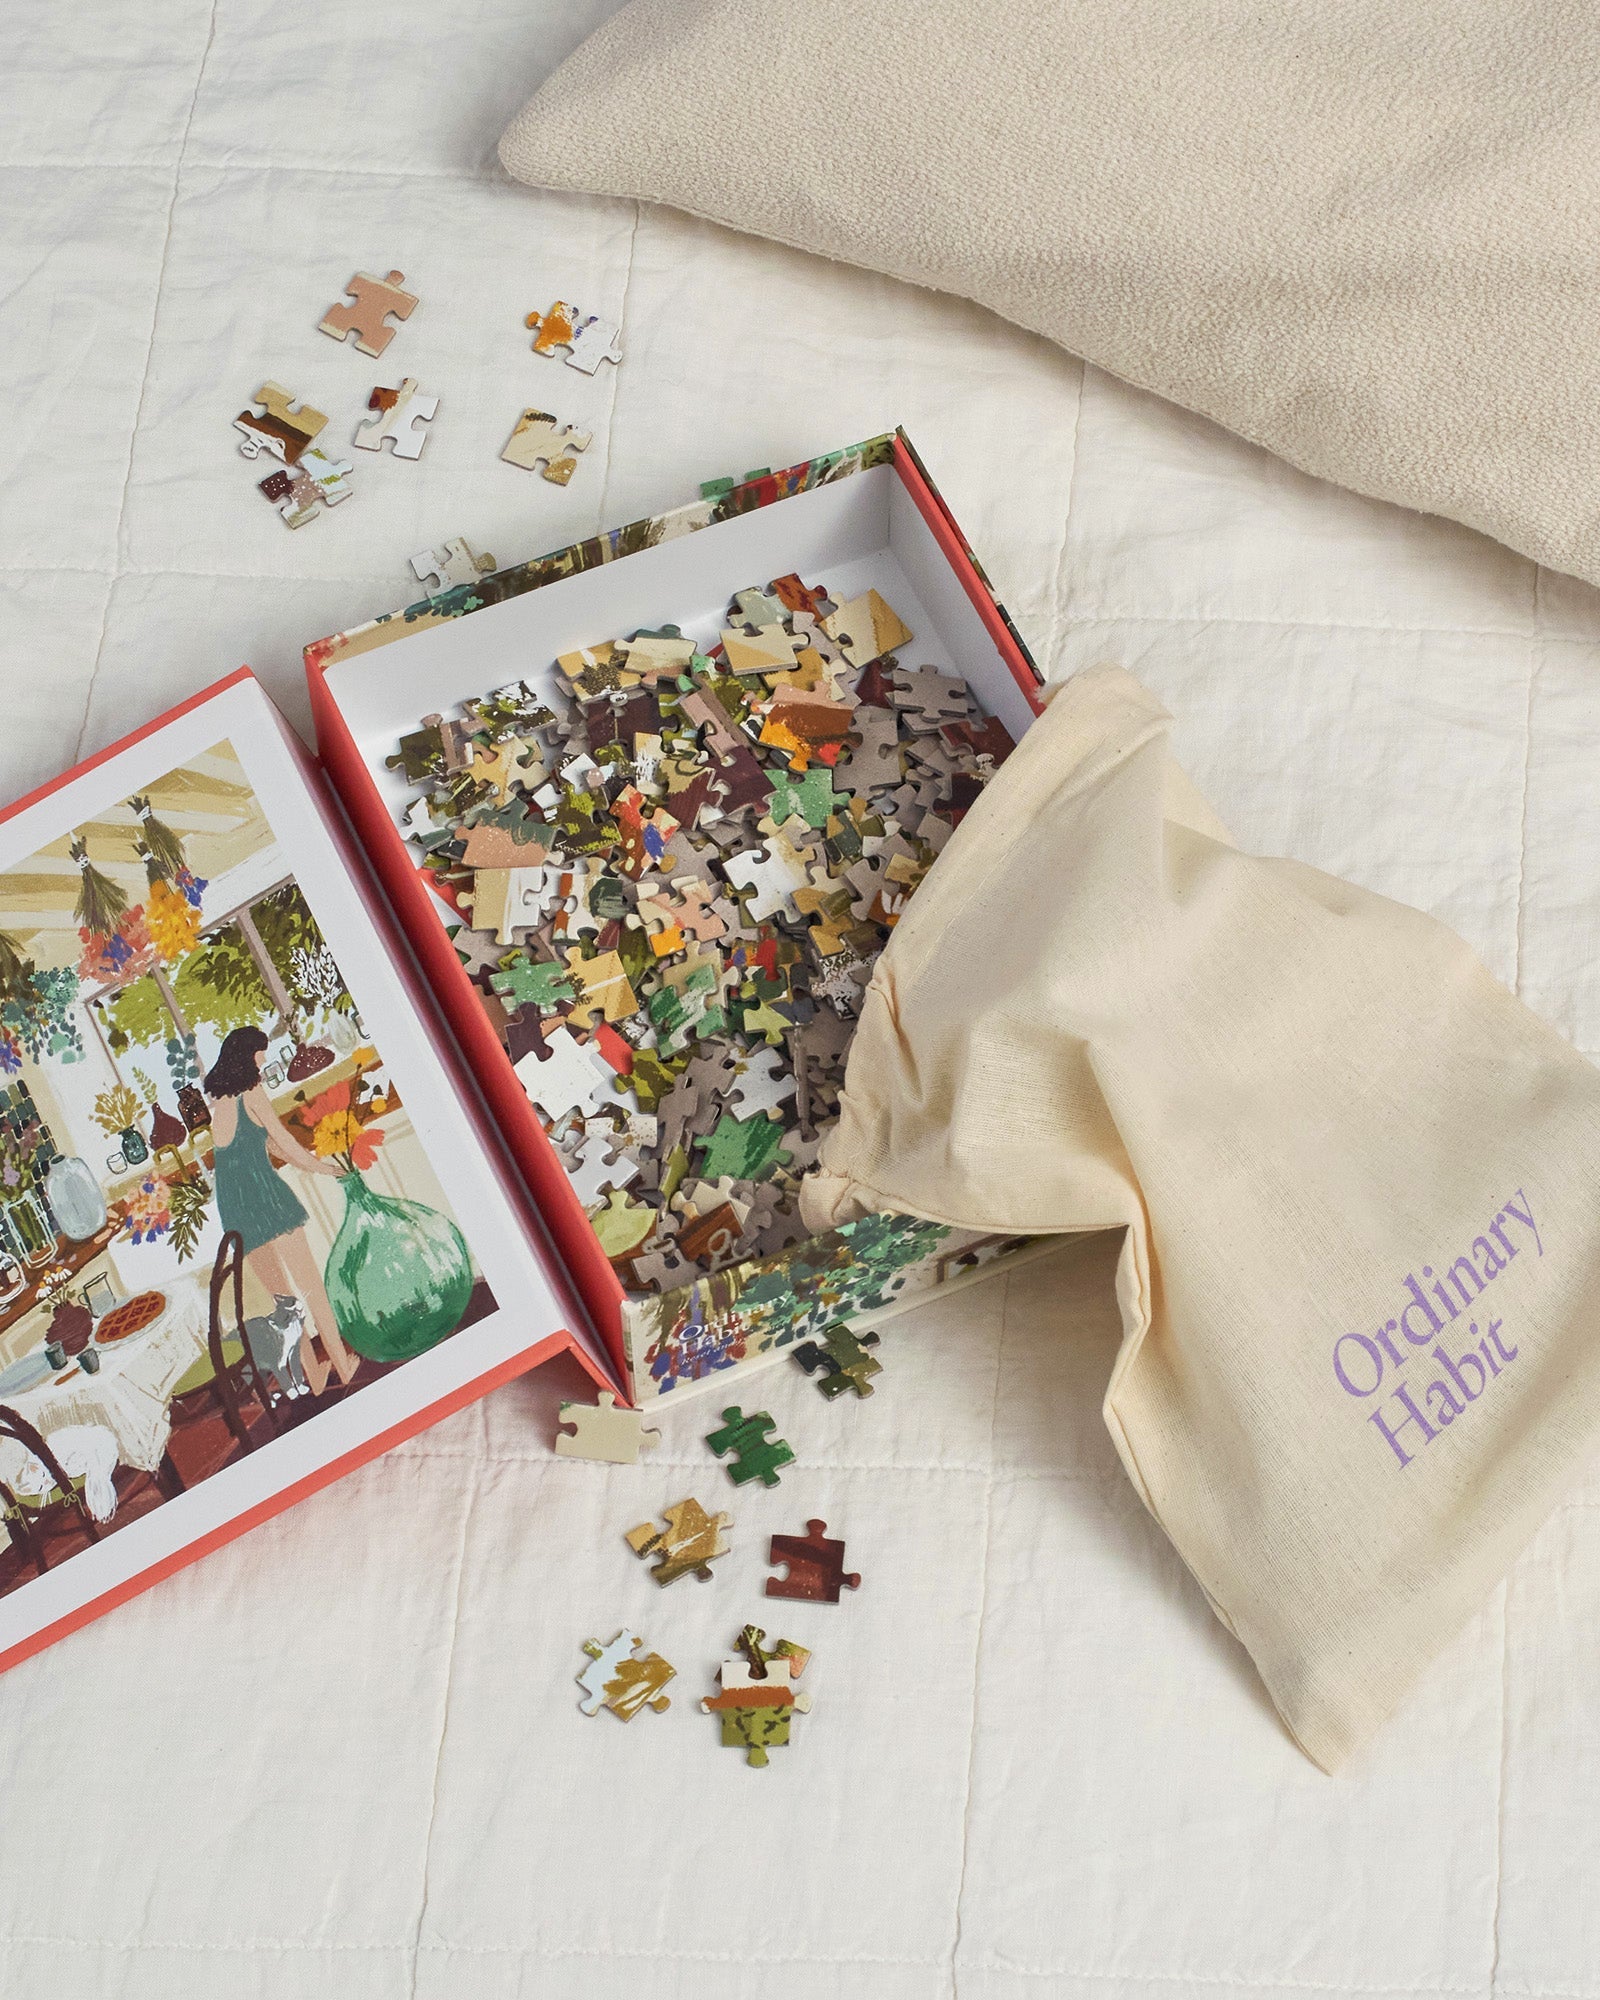 Home Flowering Puzzle by Lida Ziruffo - Ordinary Habit